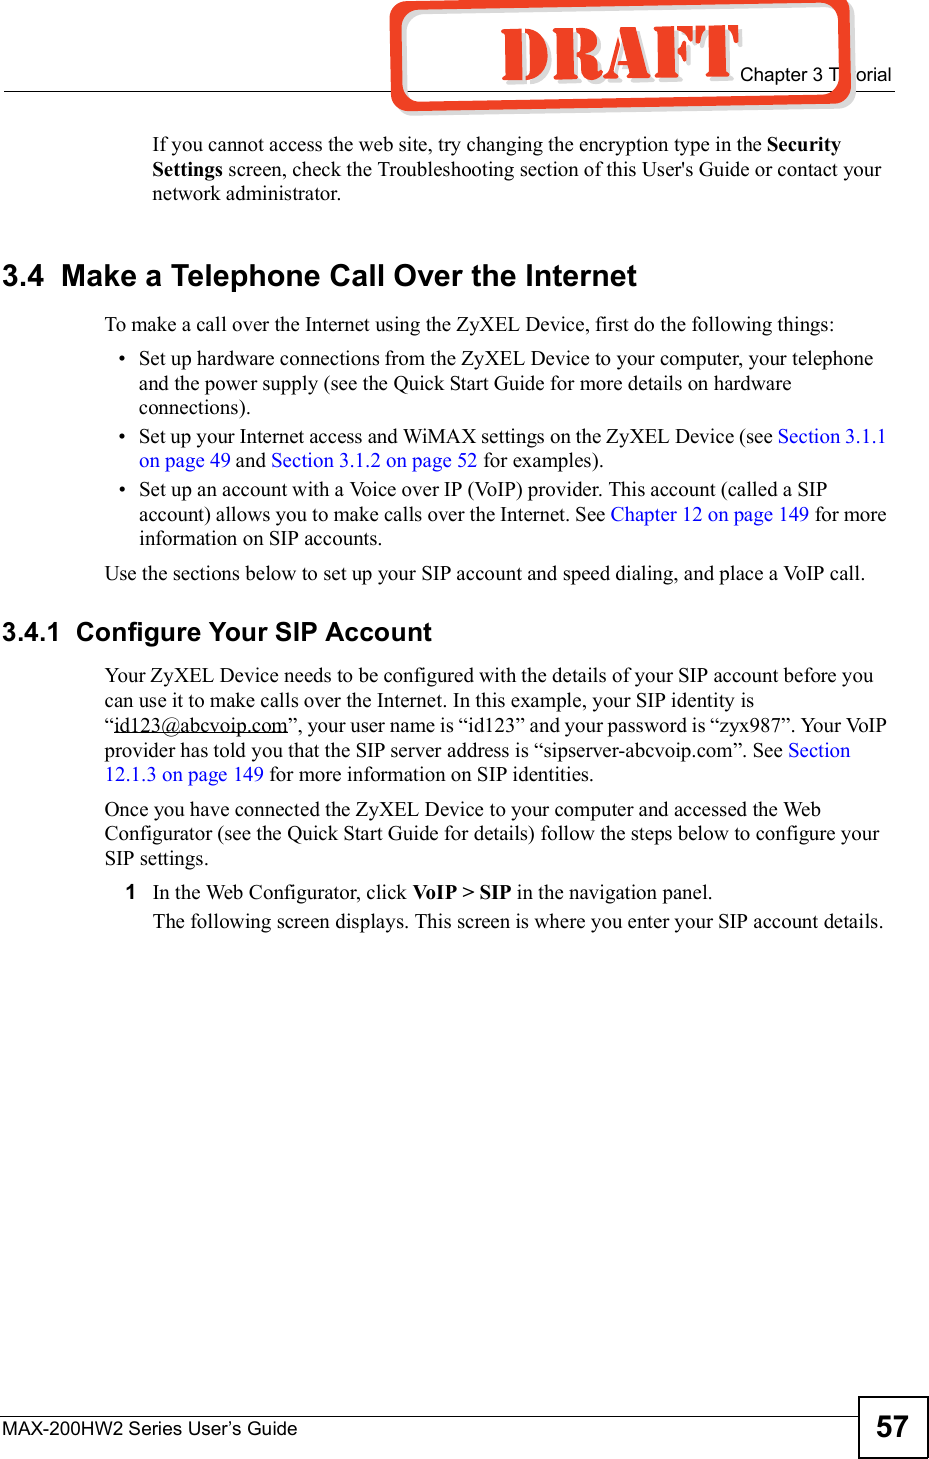  Chapter 3TutorialMAX-200HW2 Series User s Guide 57If you cannot access the web site, try changing the encryption type in the SecuritySettings screen, check the Troubleshooting section of this User&apos;s Guide or contact your network administrator.3.4  Make a Telephone Call Over the InternetTo make a call over the Internet using the ZyXEL Device, first do the following things: Set up hardware connections from the ZyXEL Device to your computer, your telephone and the power supply (see the Quick Start Guide for more details on hardware connections). Set up your Internet access and WiMAX settings on the ZyXEL Device (see Section 3.1.1 on page 49 and Section 3.1.2 on page 52 for examples). Set up an account with a Voice over IP (VoIP) provider. This account (called a SIP account) allows you to make calls over the Internet. See Chapter 12 on page 149 for more information on SIP accounts.Use the sections below to set up your SIP account and speed dialing, and place a VoIP call.3.4.1  Configure Your SIP AccountYour ZyXEL Device needs to be configured with the details of your SIP account before you can use it to make calls over the Internet. In this example, your SIP identity is &quot;id123@abcvoip.com#, your user name is &quot;id123# and your password is &quot;zyx987#. Your VoIP provider has told you that the SIP server address is &quot;sipserver-abcvoip.com#. See Section12.1.3 on page 149 for more information on SIP identities.Once you have connected the ZyXEL Device to your computer and accessed the Web Configurator (see the Quick Start Guide for details) follow the steps below to configure your SIP settings.1In the Web Configurator, click VoIP &gt; SIP in the navigation panel. The following screen displays. This screen is where you enter your SIP account details.